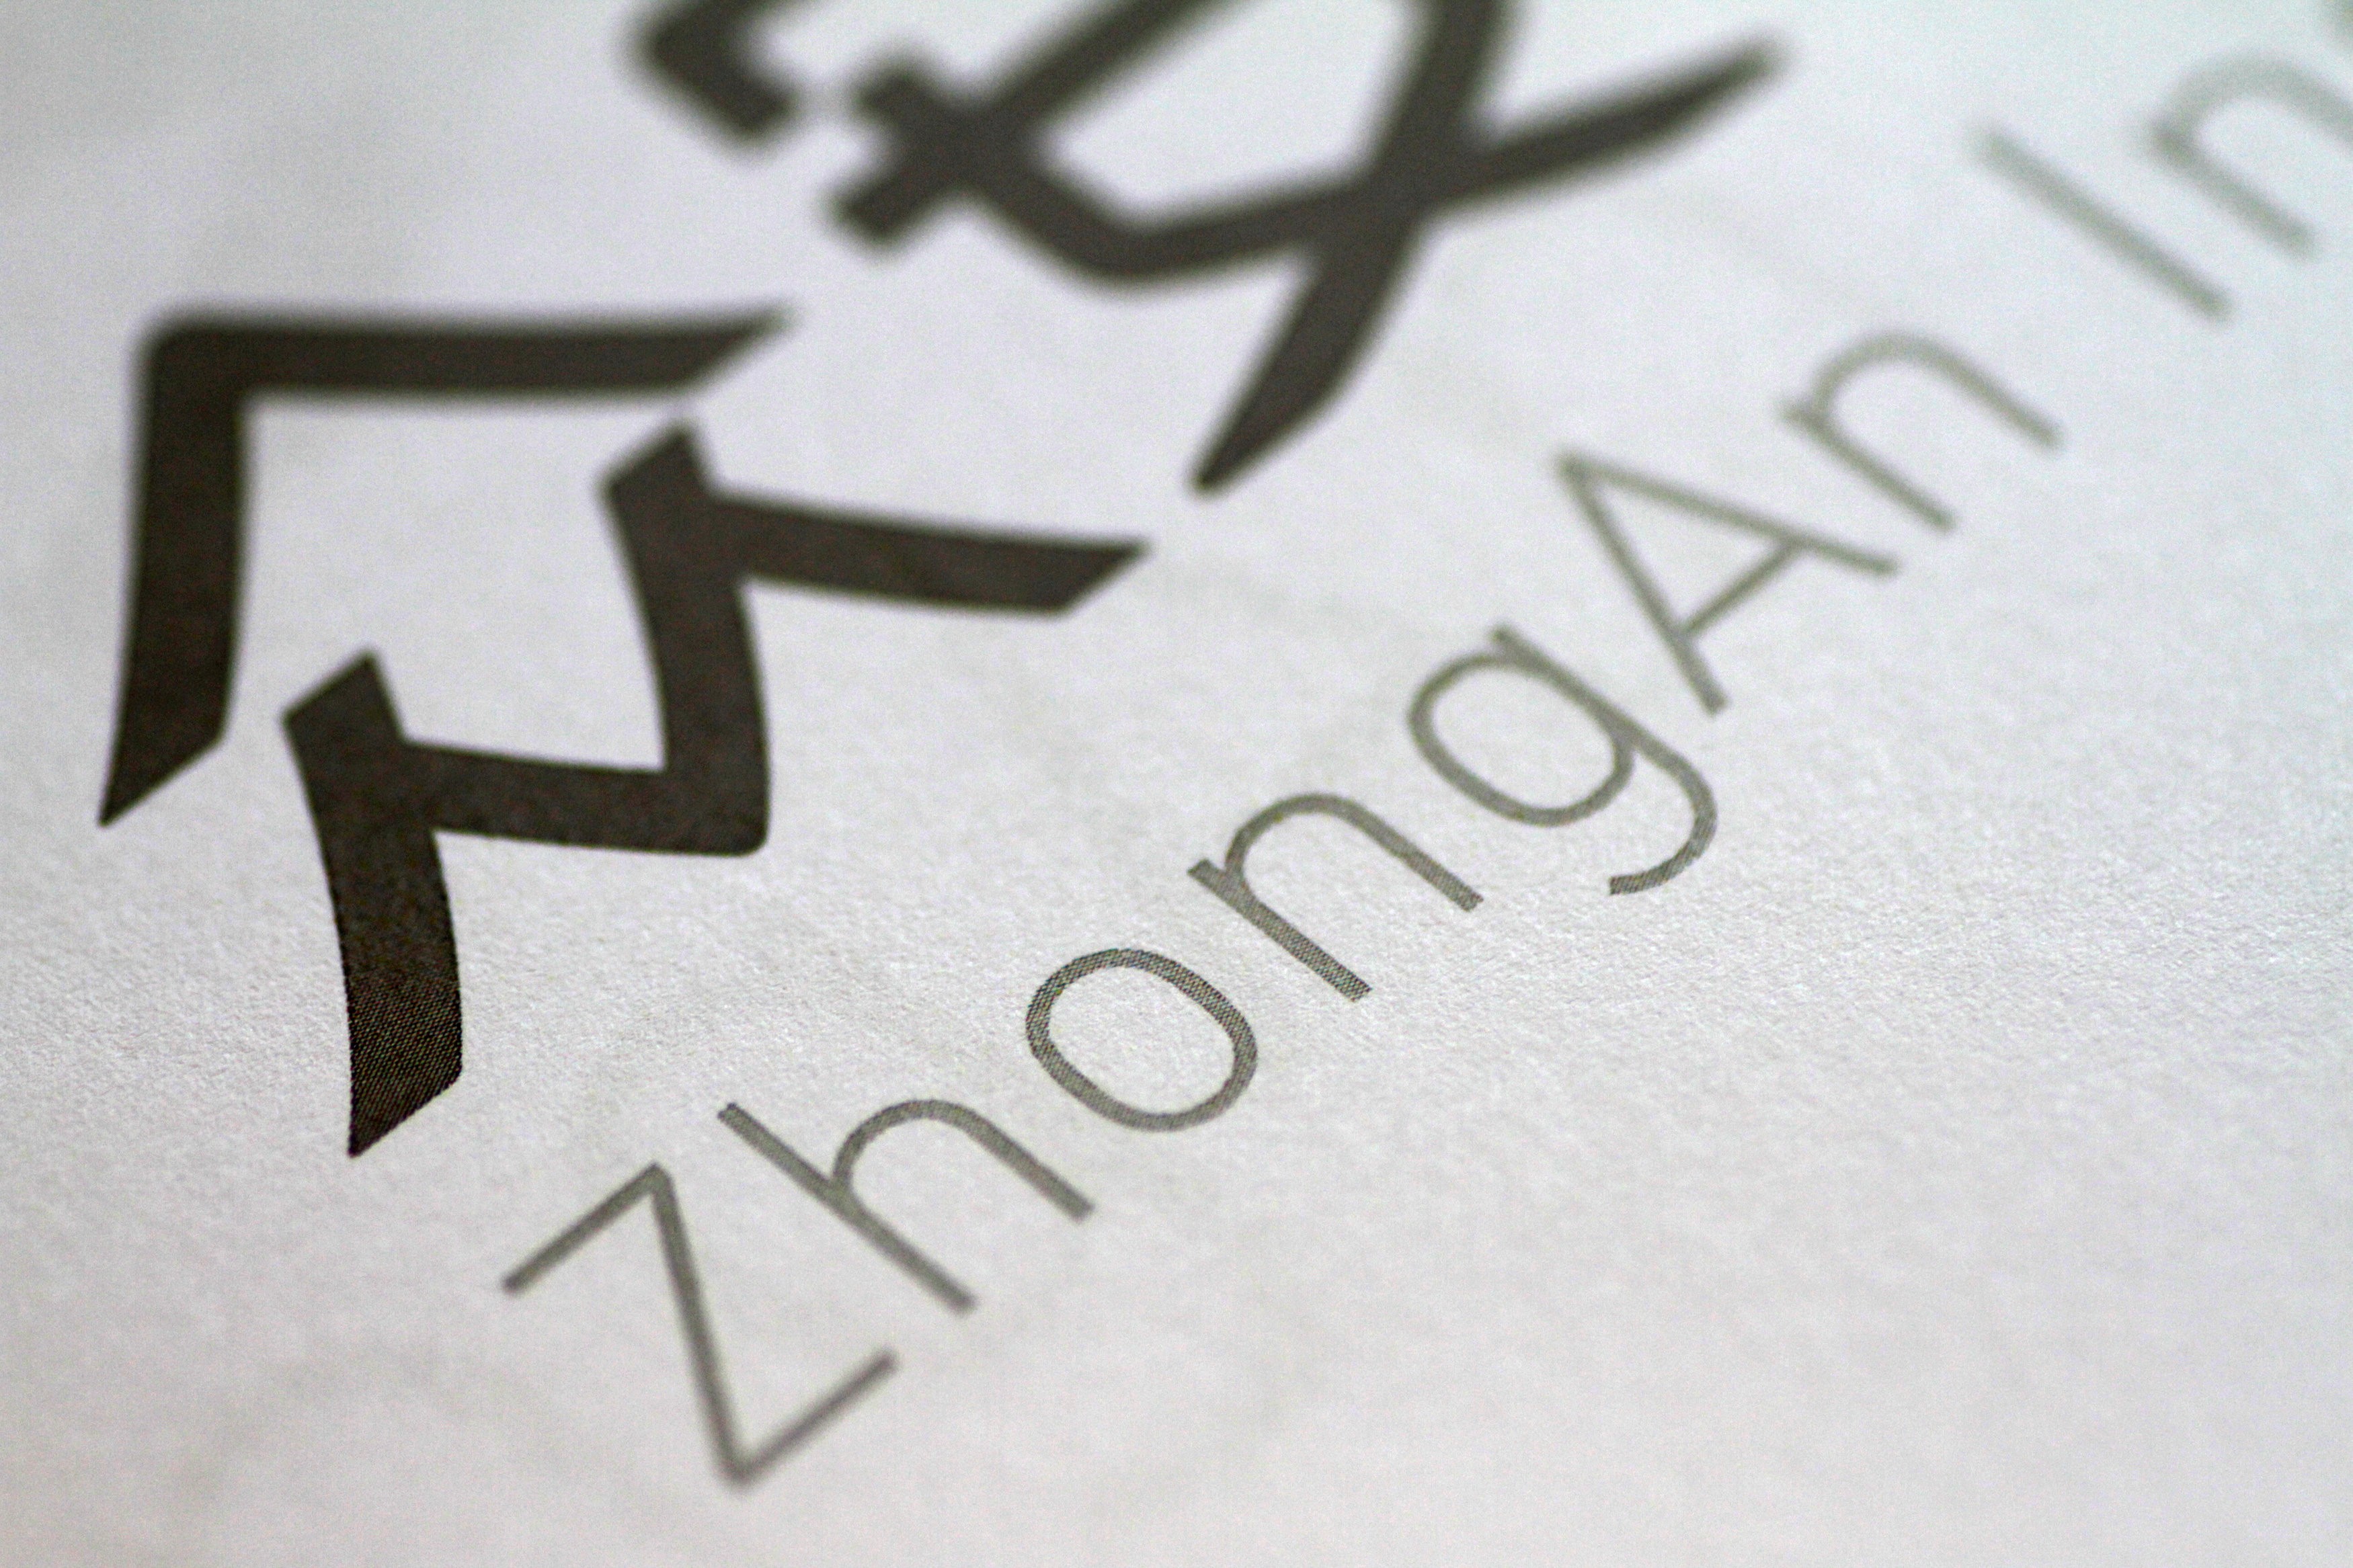 ZhongAn Online Property & Casualty Insurance is China’s first and largest online-only insurer. Photo: Reuters